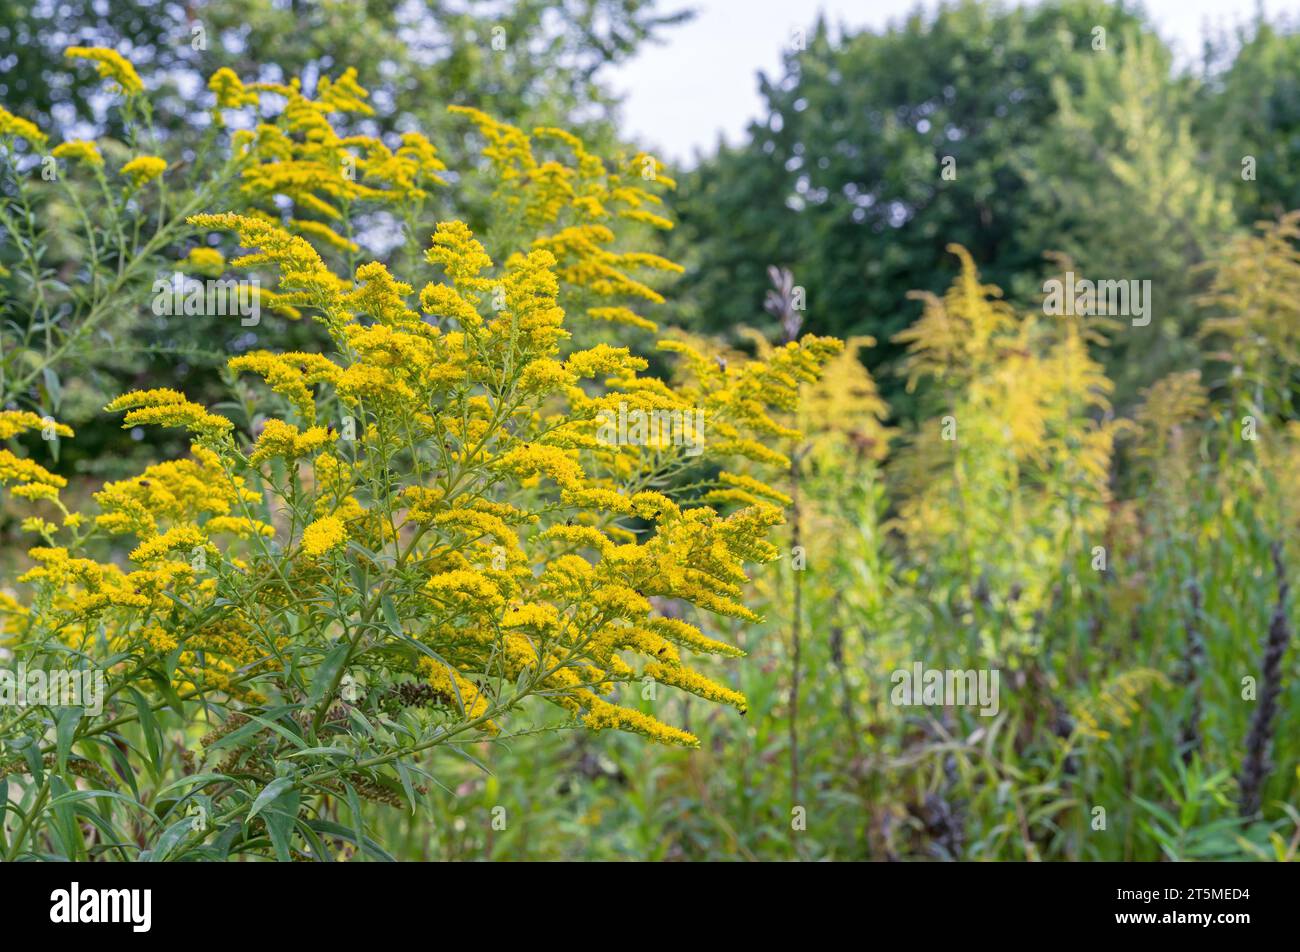 Canadian goldenrod or Solidago canadensis blooms with yellow flowers in autumn. Stock Photo